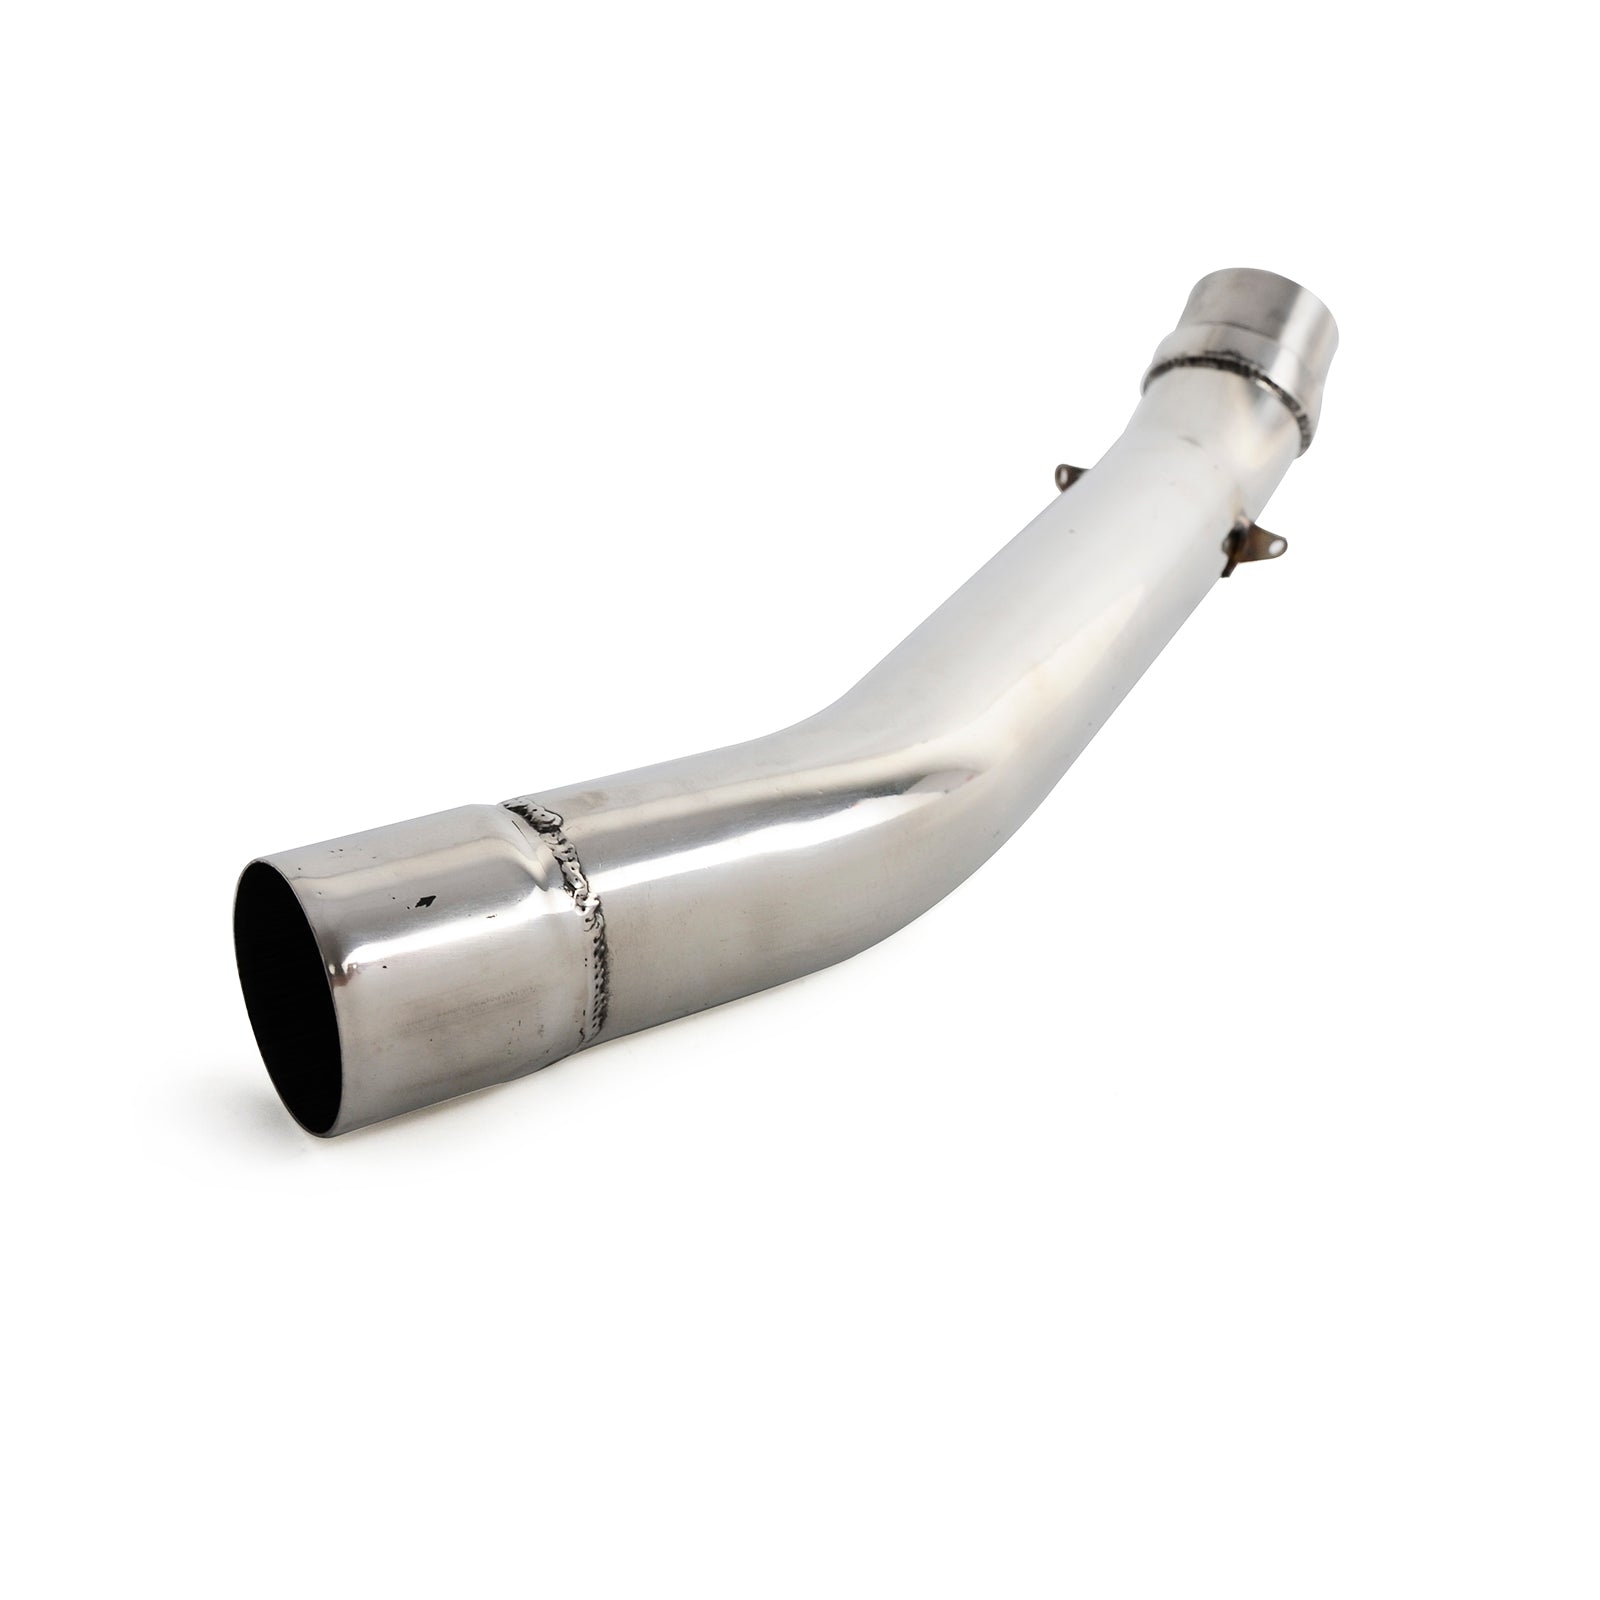 Motorcycle Stainless Steel Slip-On Exhaust Mid Pipe For Kawasaki Z750 Z750R 2007-2012